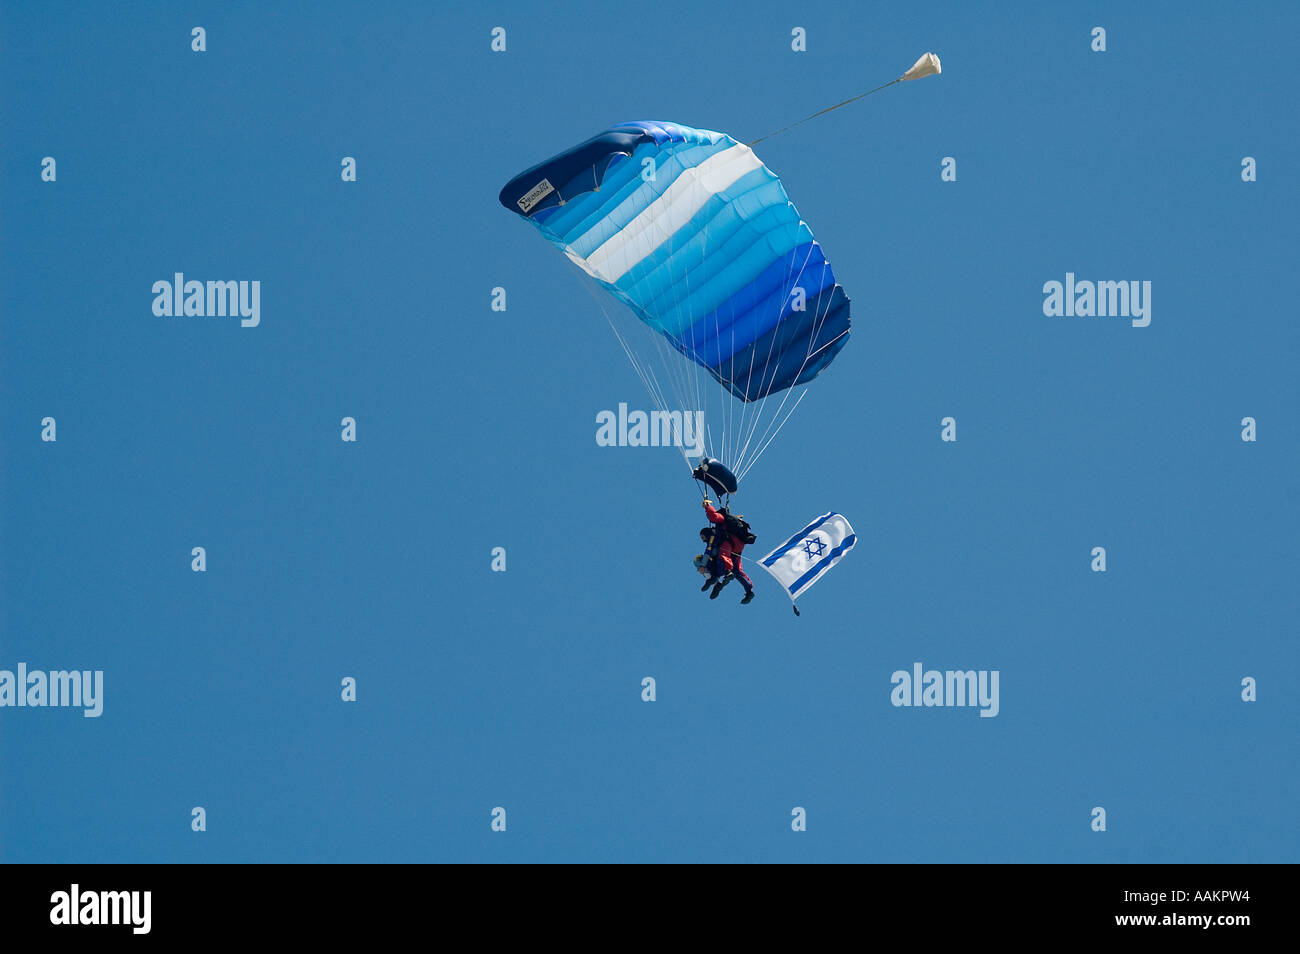 Two Israeli skydivers in tandem jump landing a 'square' ram-air parachute Stock Photo